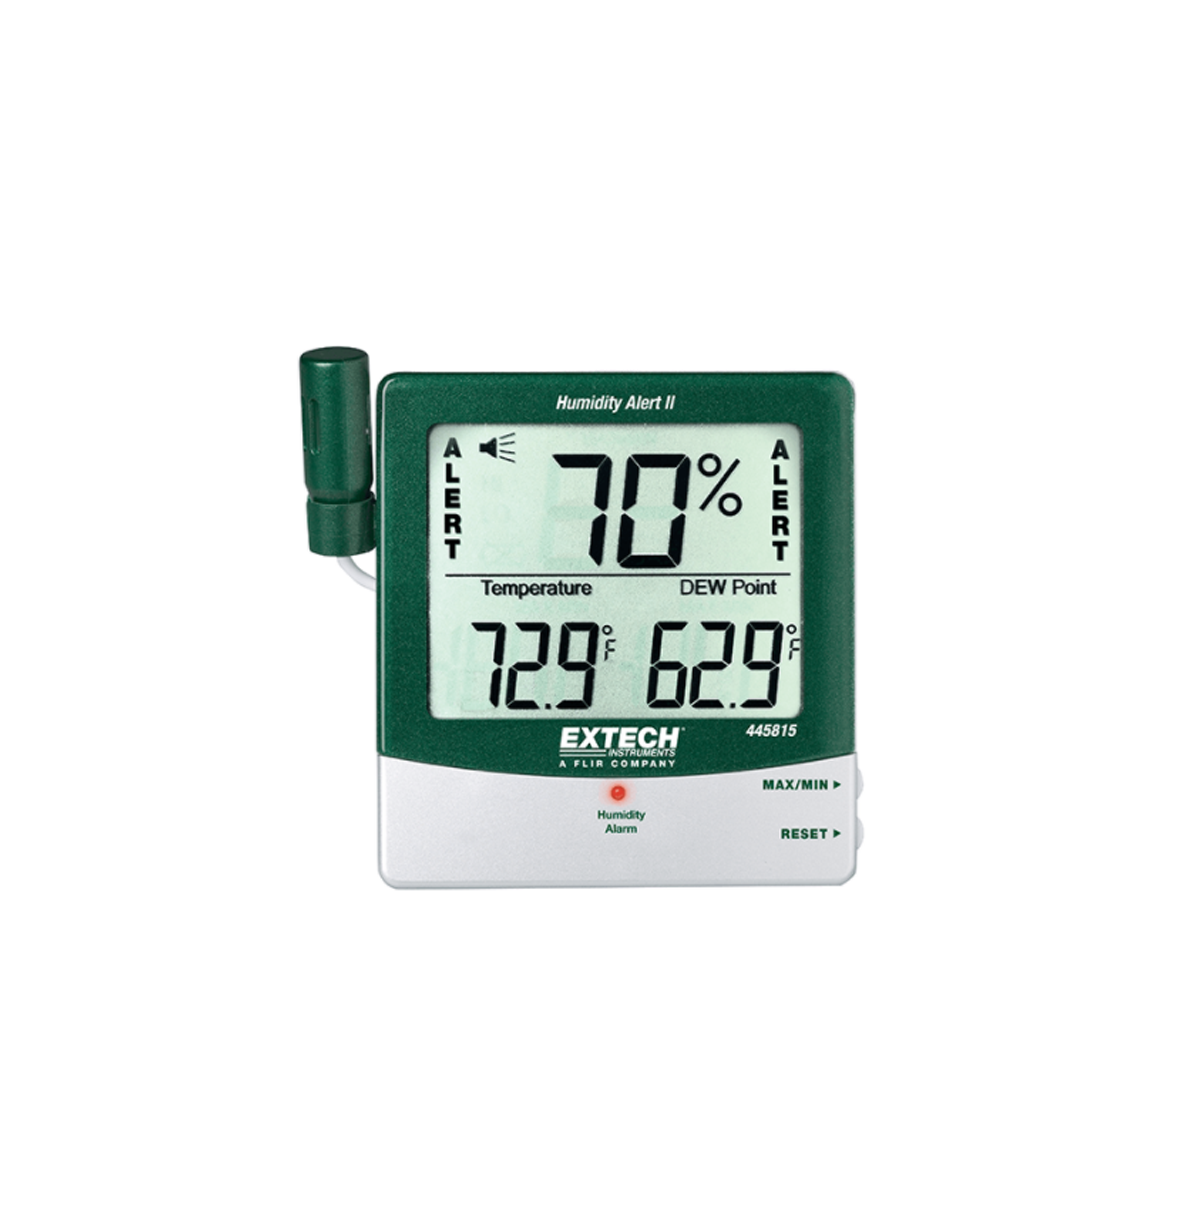 https://www.cetm.com.sg/1887-superlarge_default/extech-445815-hygro-thermometer-humidity-alert-with-dew-point.jpg